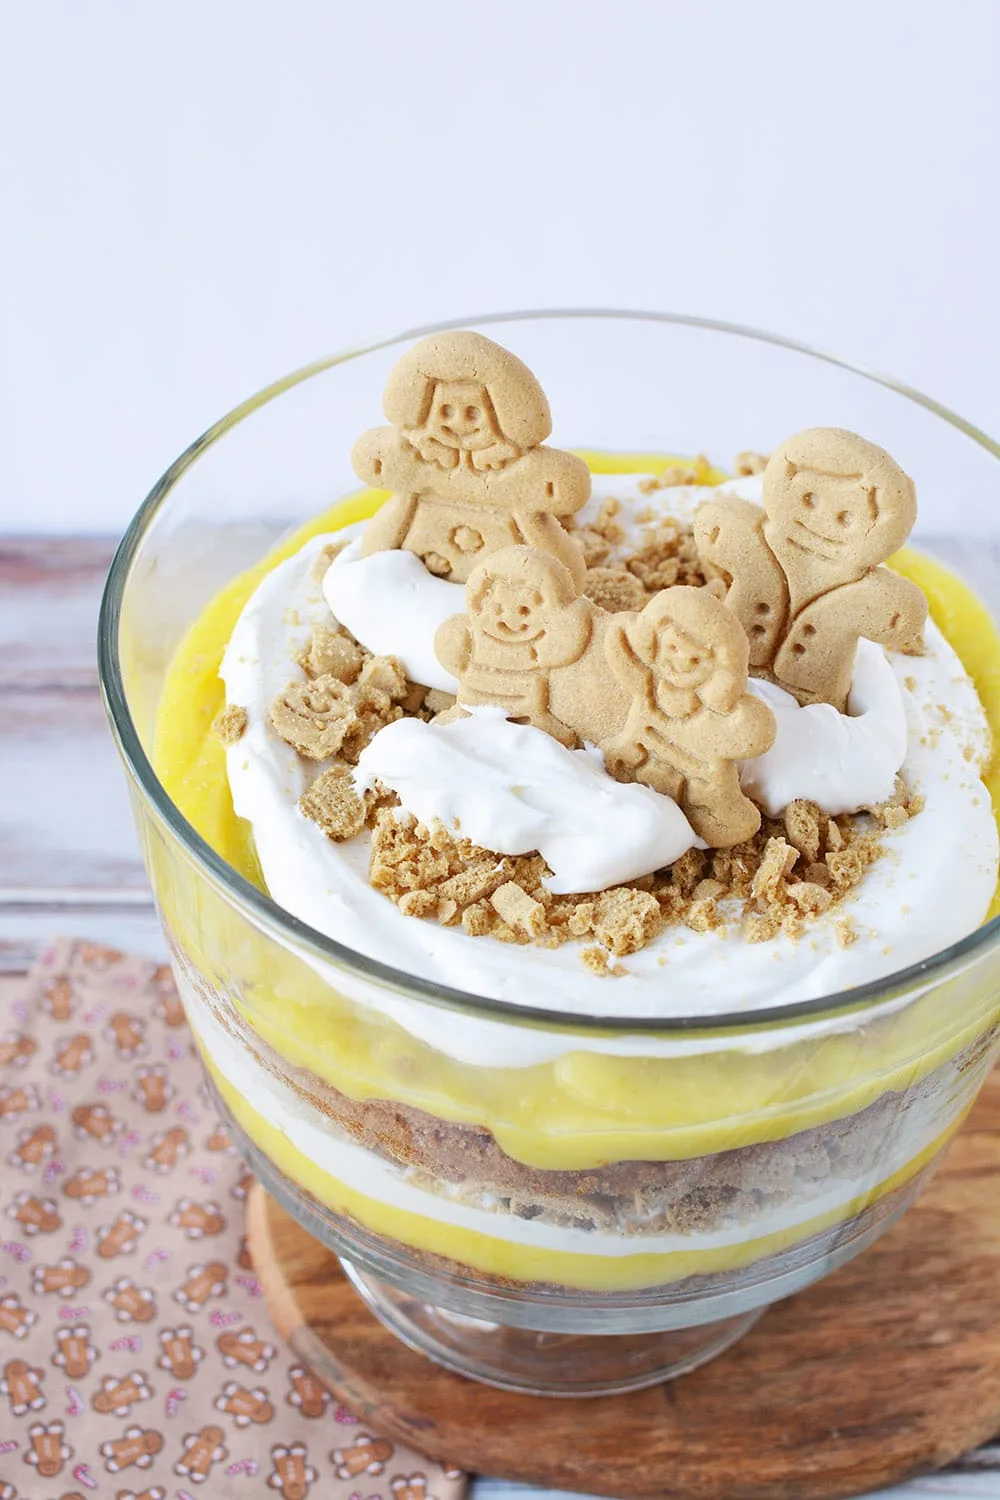 Gingerbread man trifle on a table.